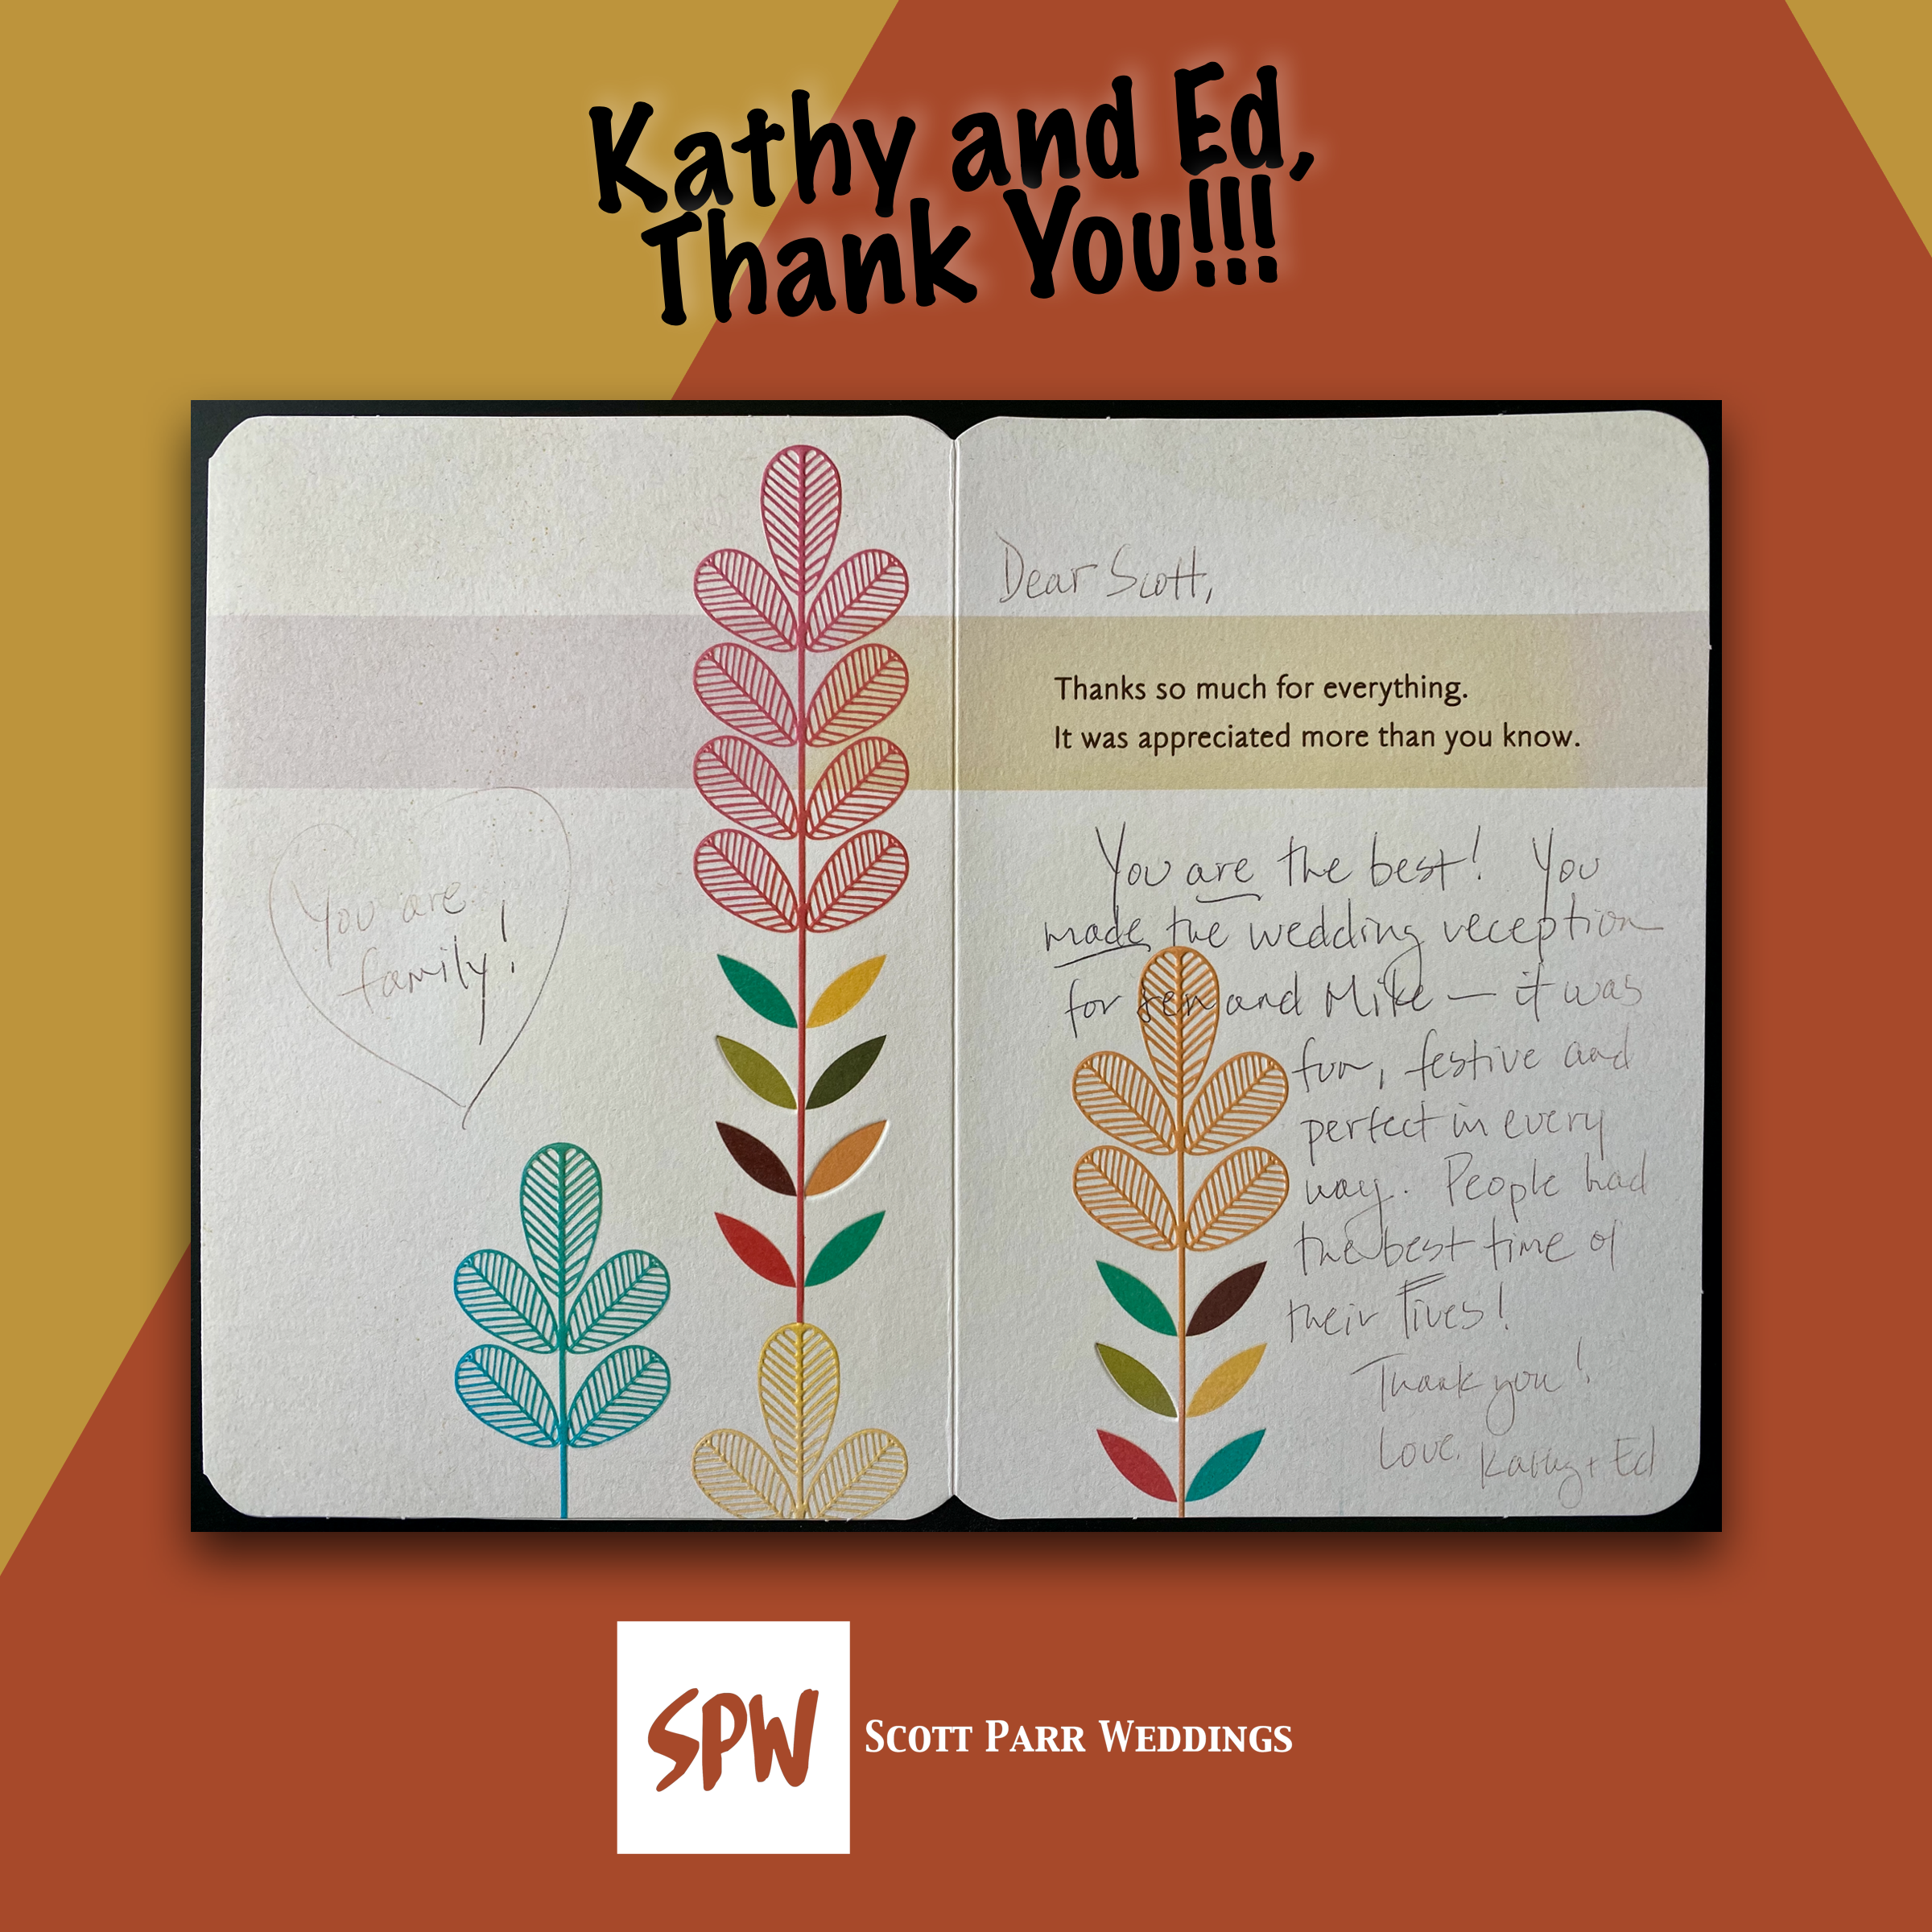 SPW - Thank You - Kathy and Ed.png